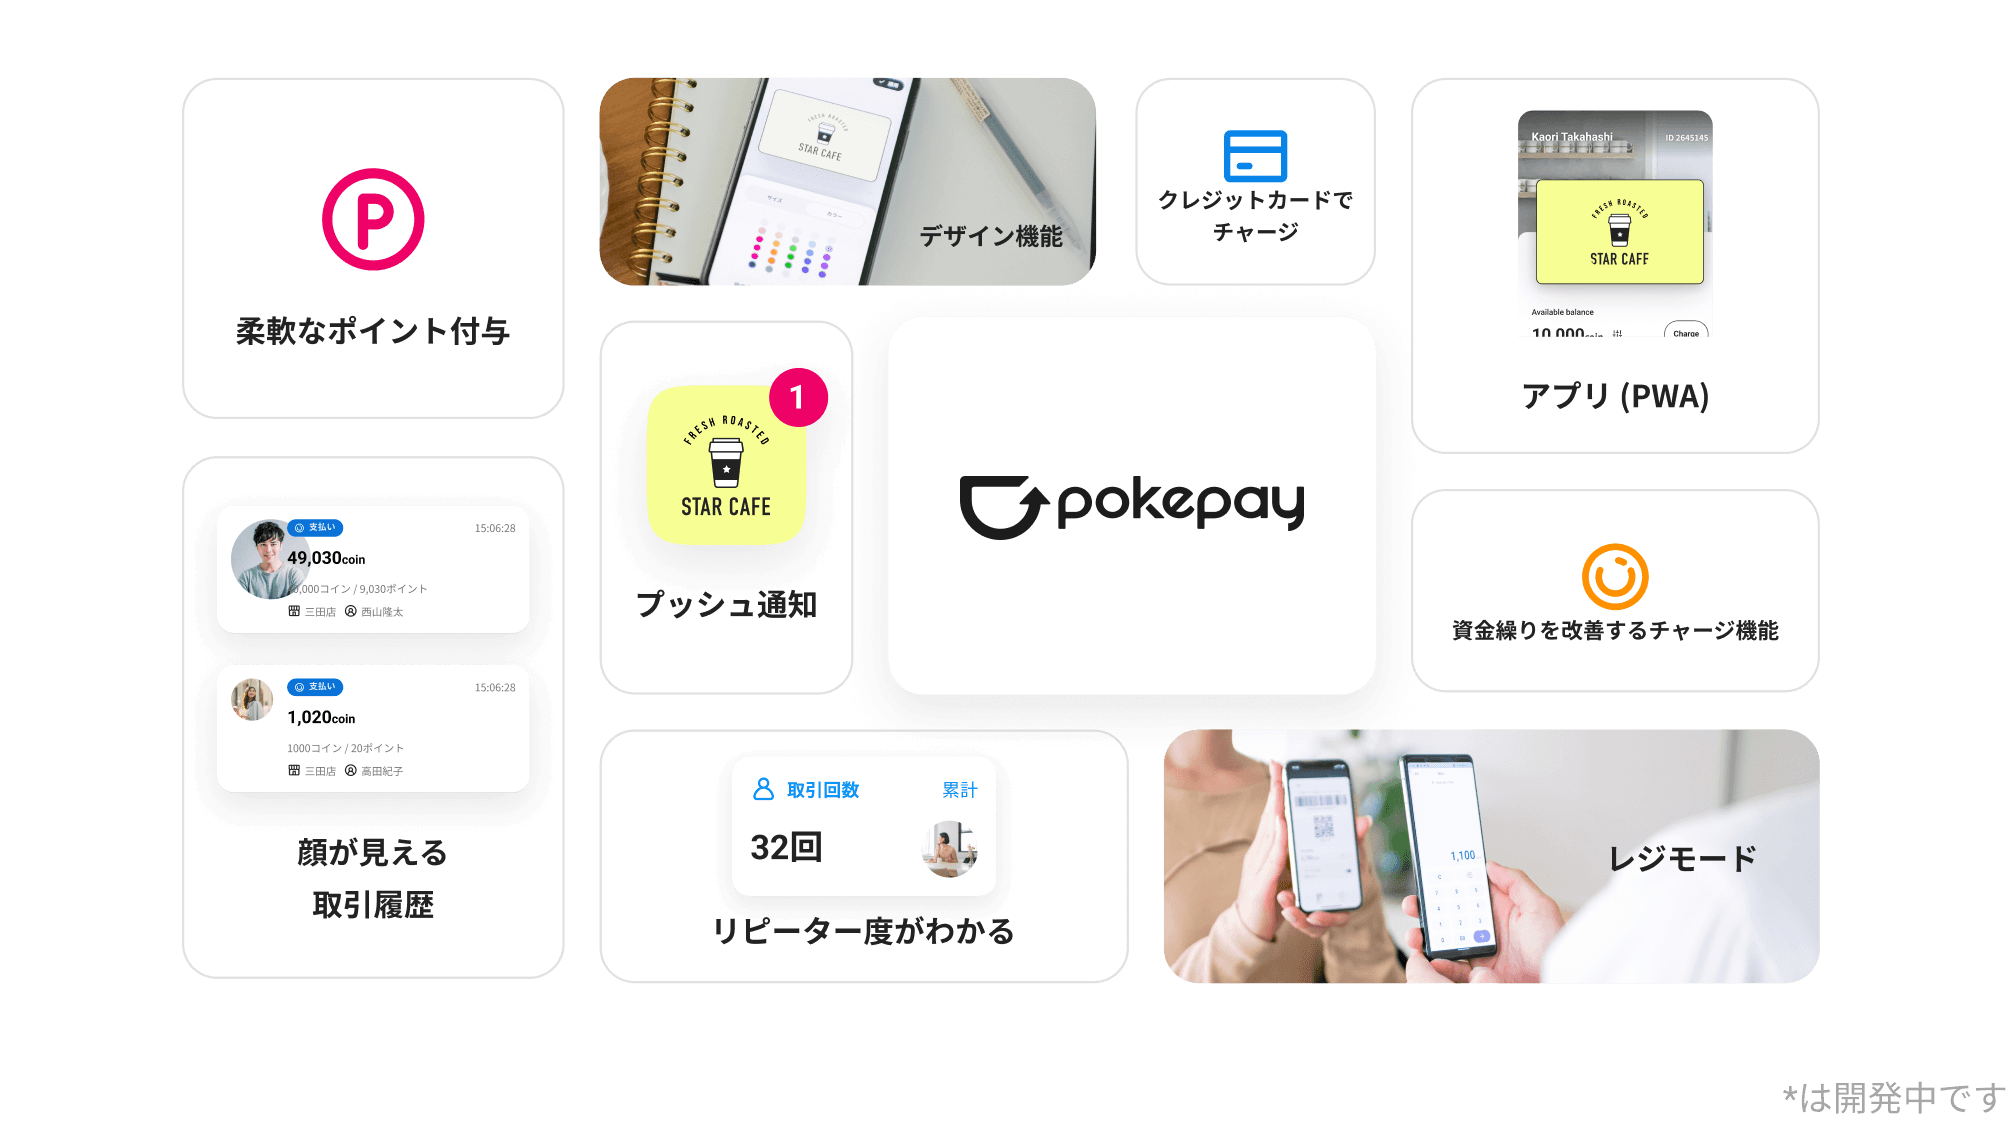 The image of Pokepay Apps Function introduction for Japanese